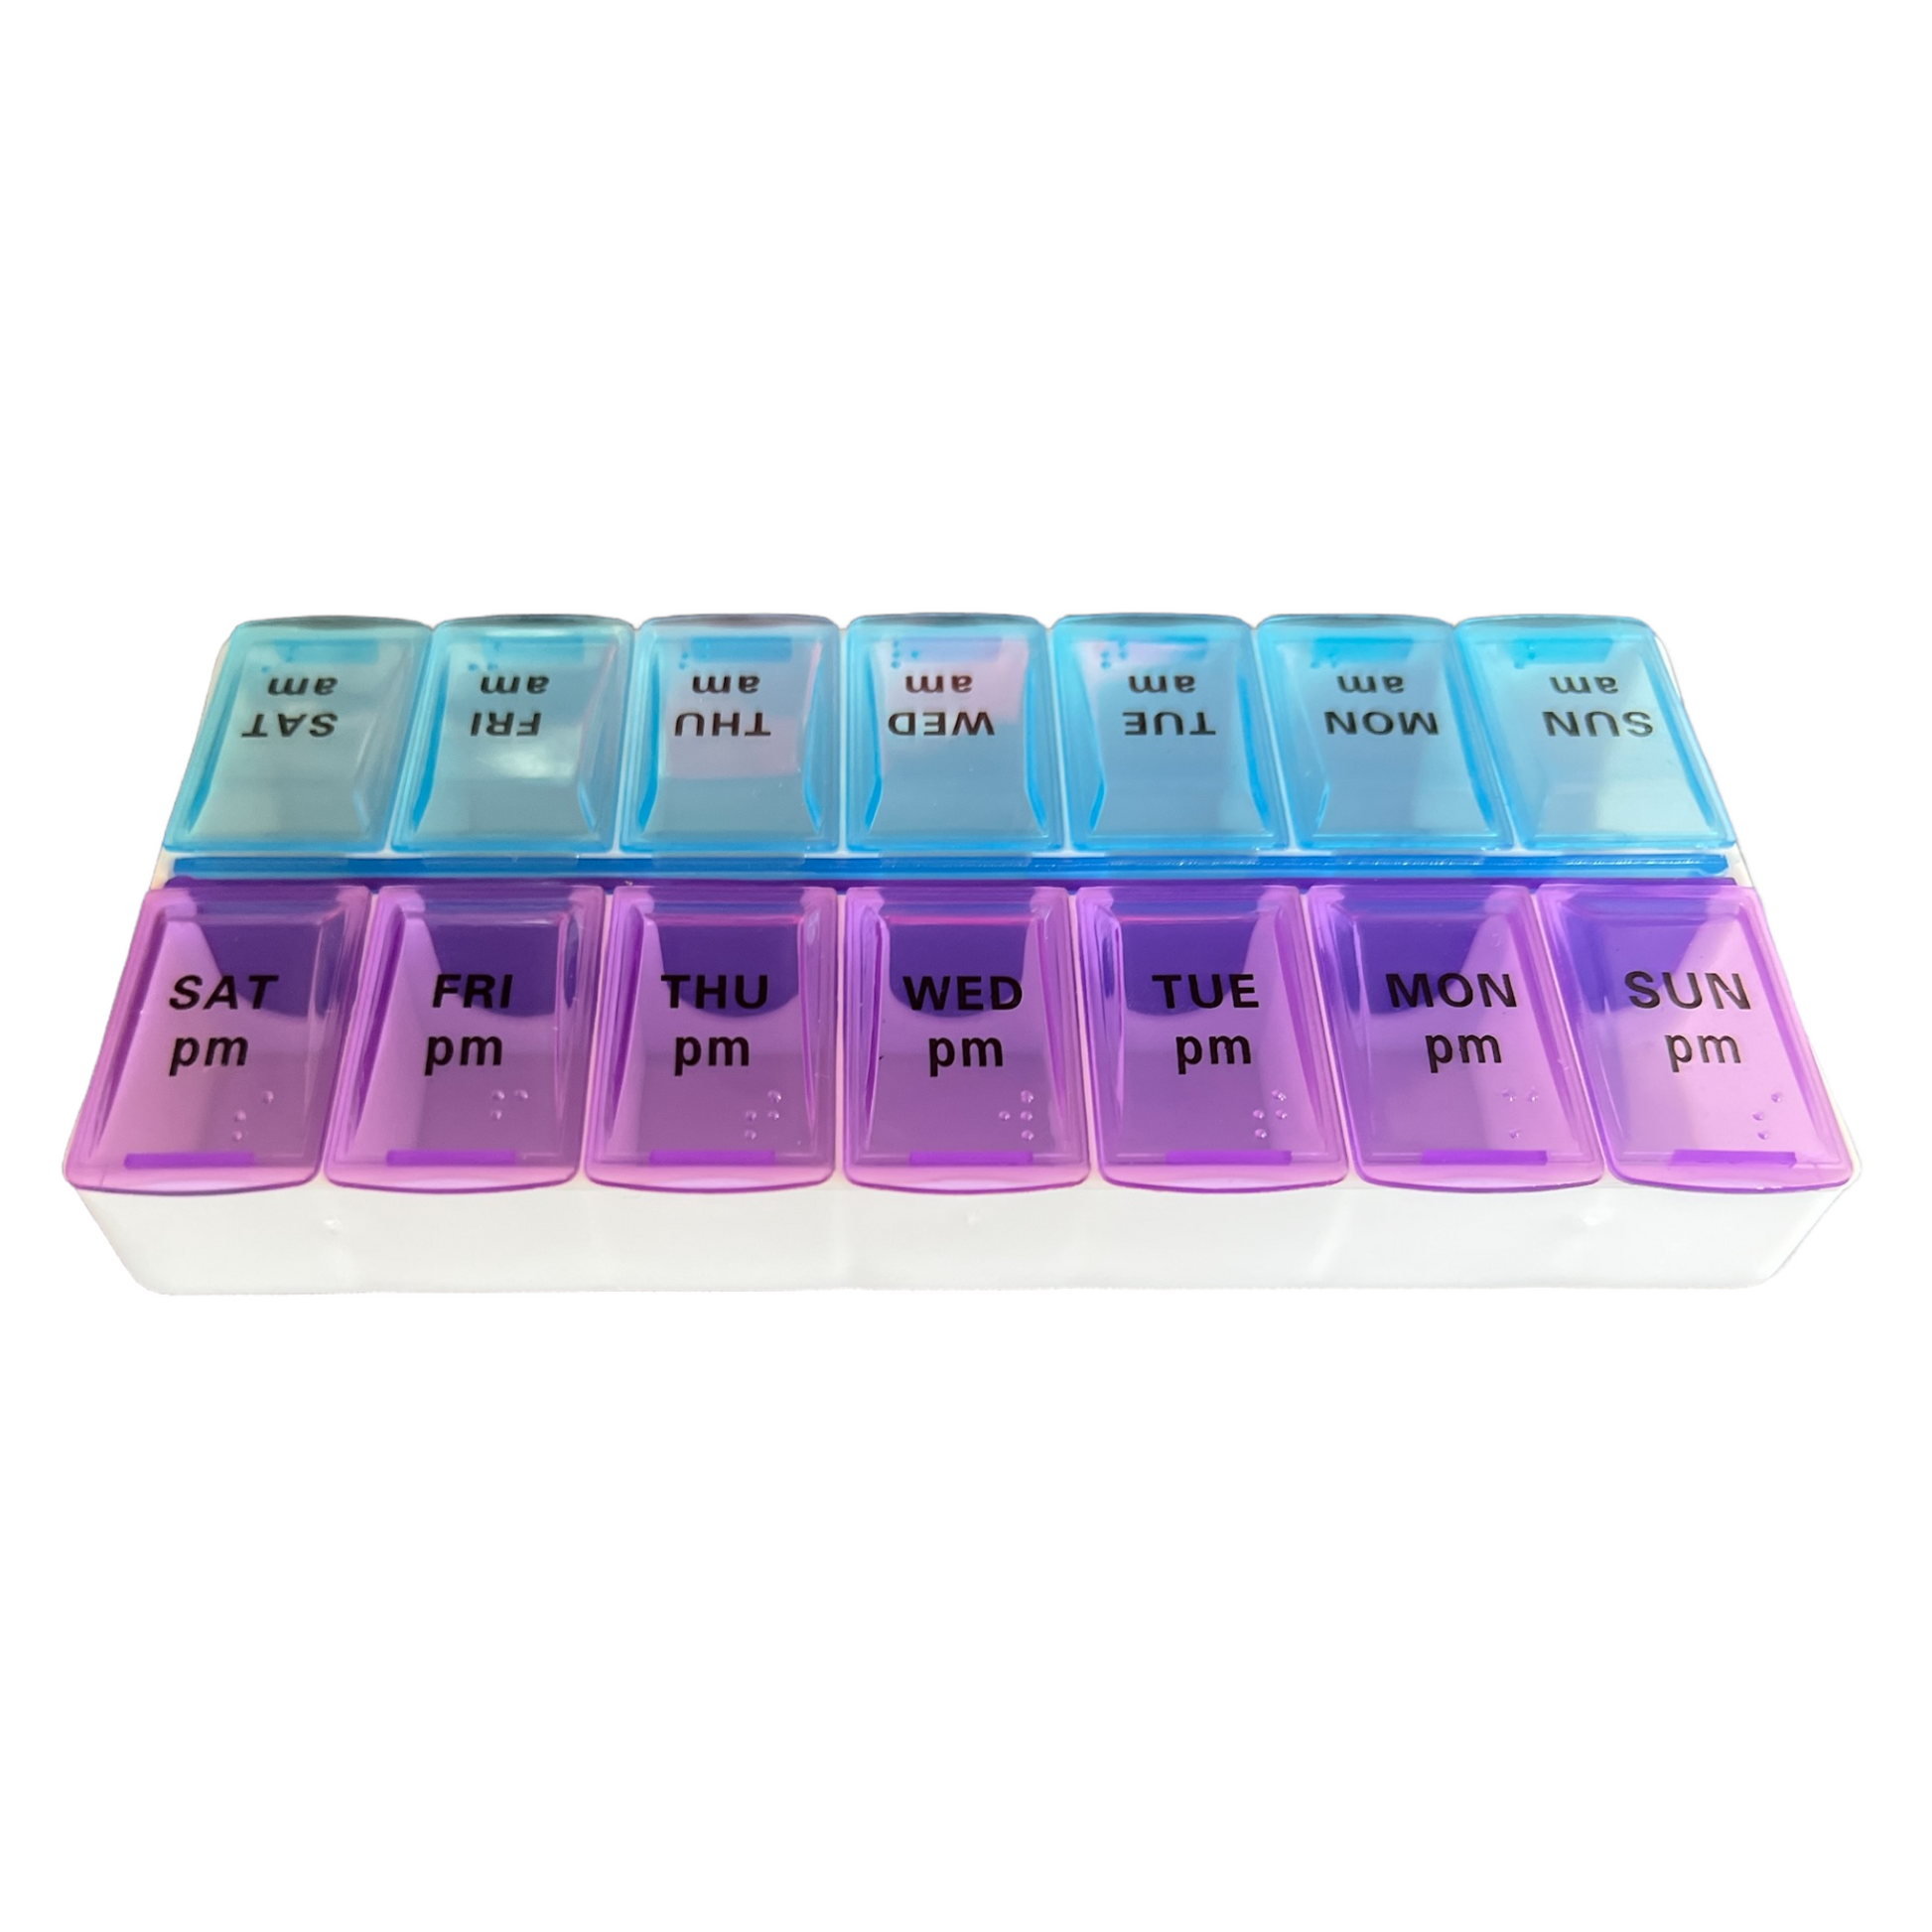 7 Day Pill Box — 2x Blisters Daily - SMALL Managing Medications SPIRIT SPARKPLUGS Small Box  